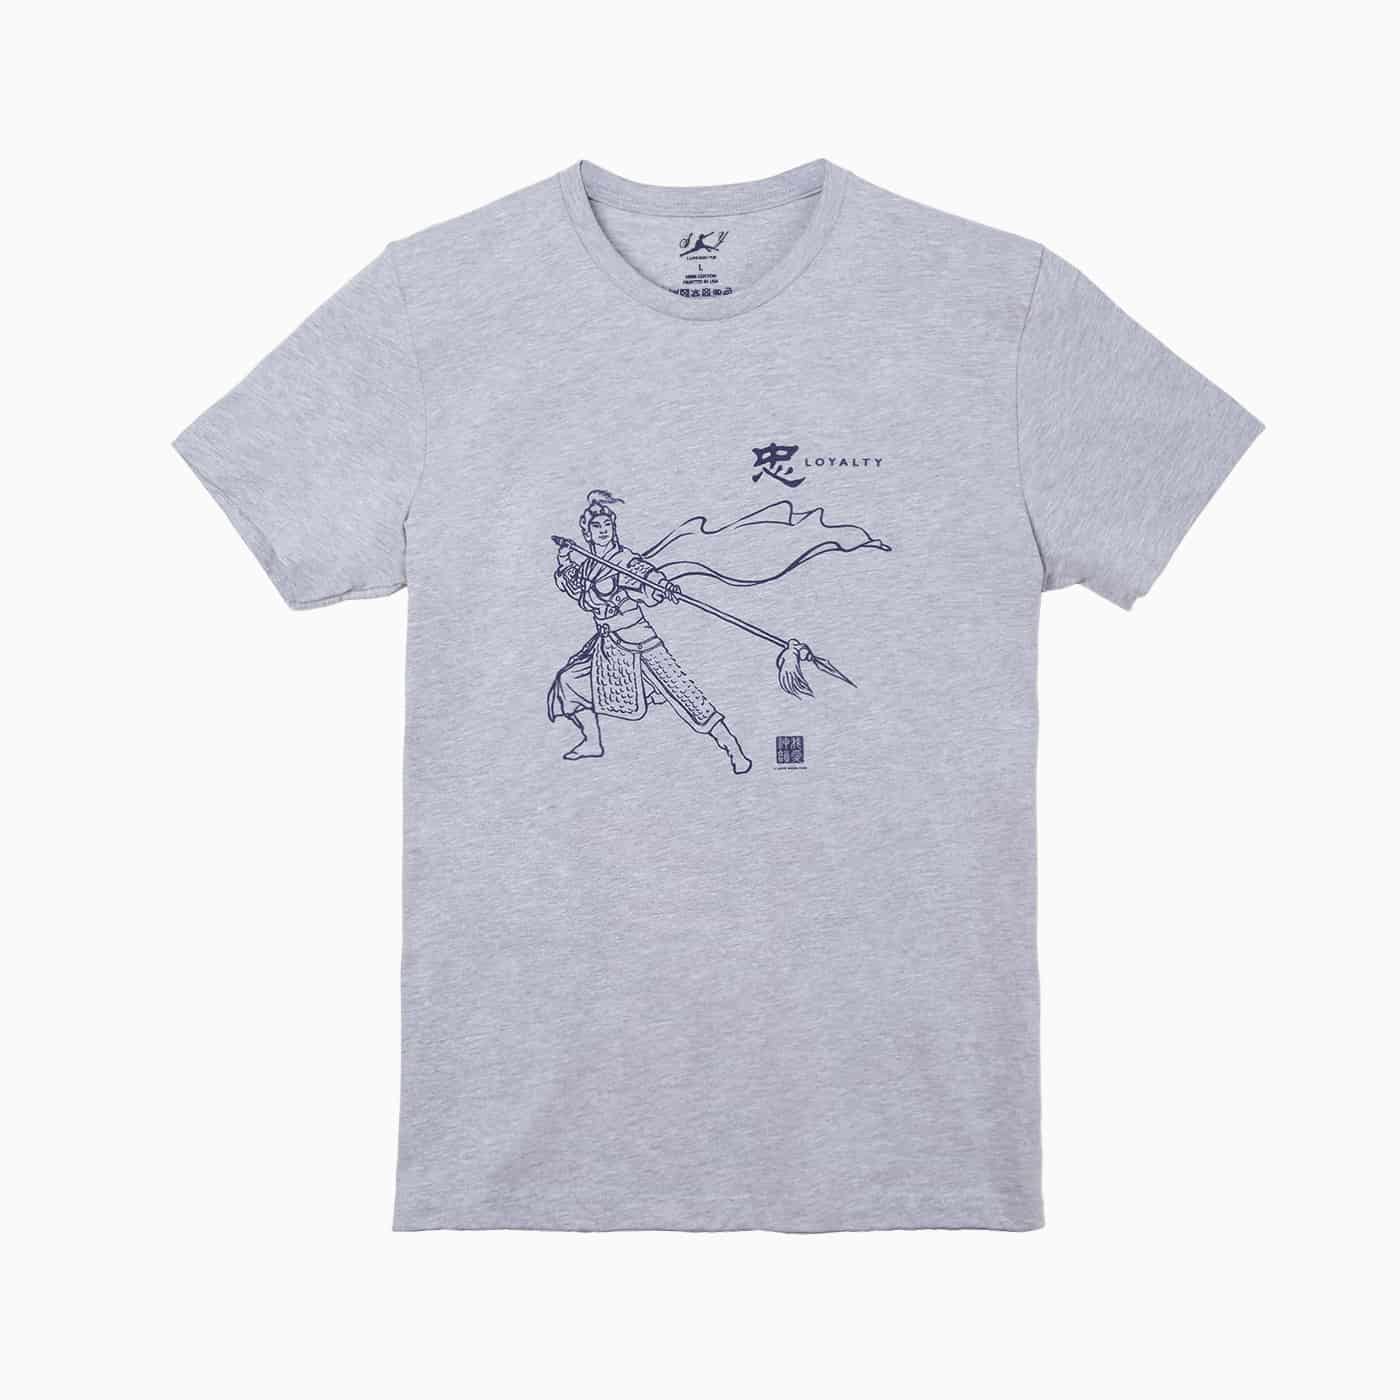 The Loyalty of Yue Fei T-shirt - Grey